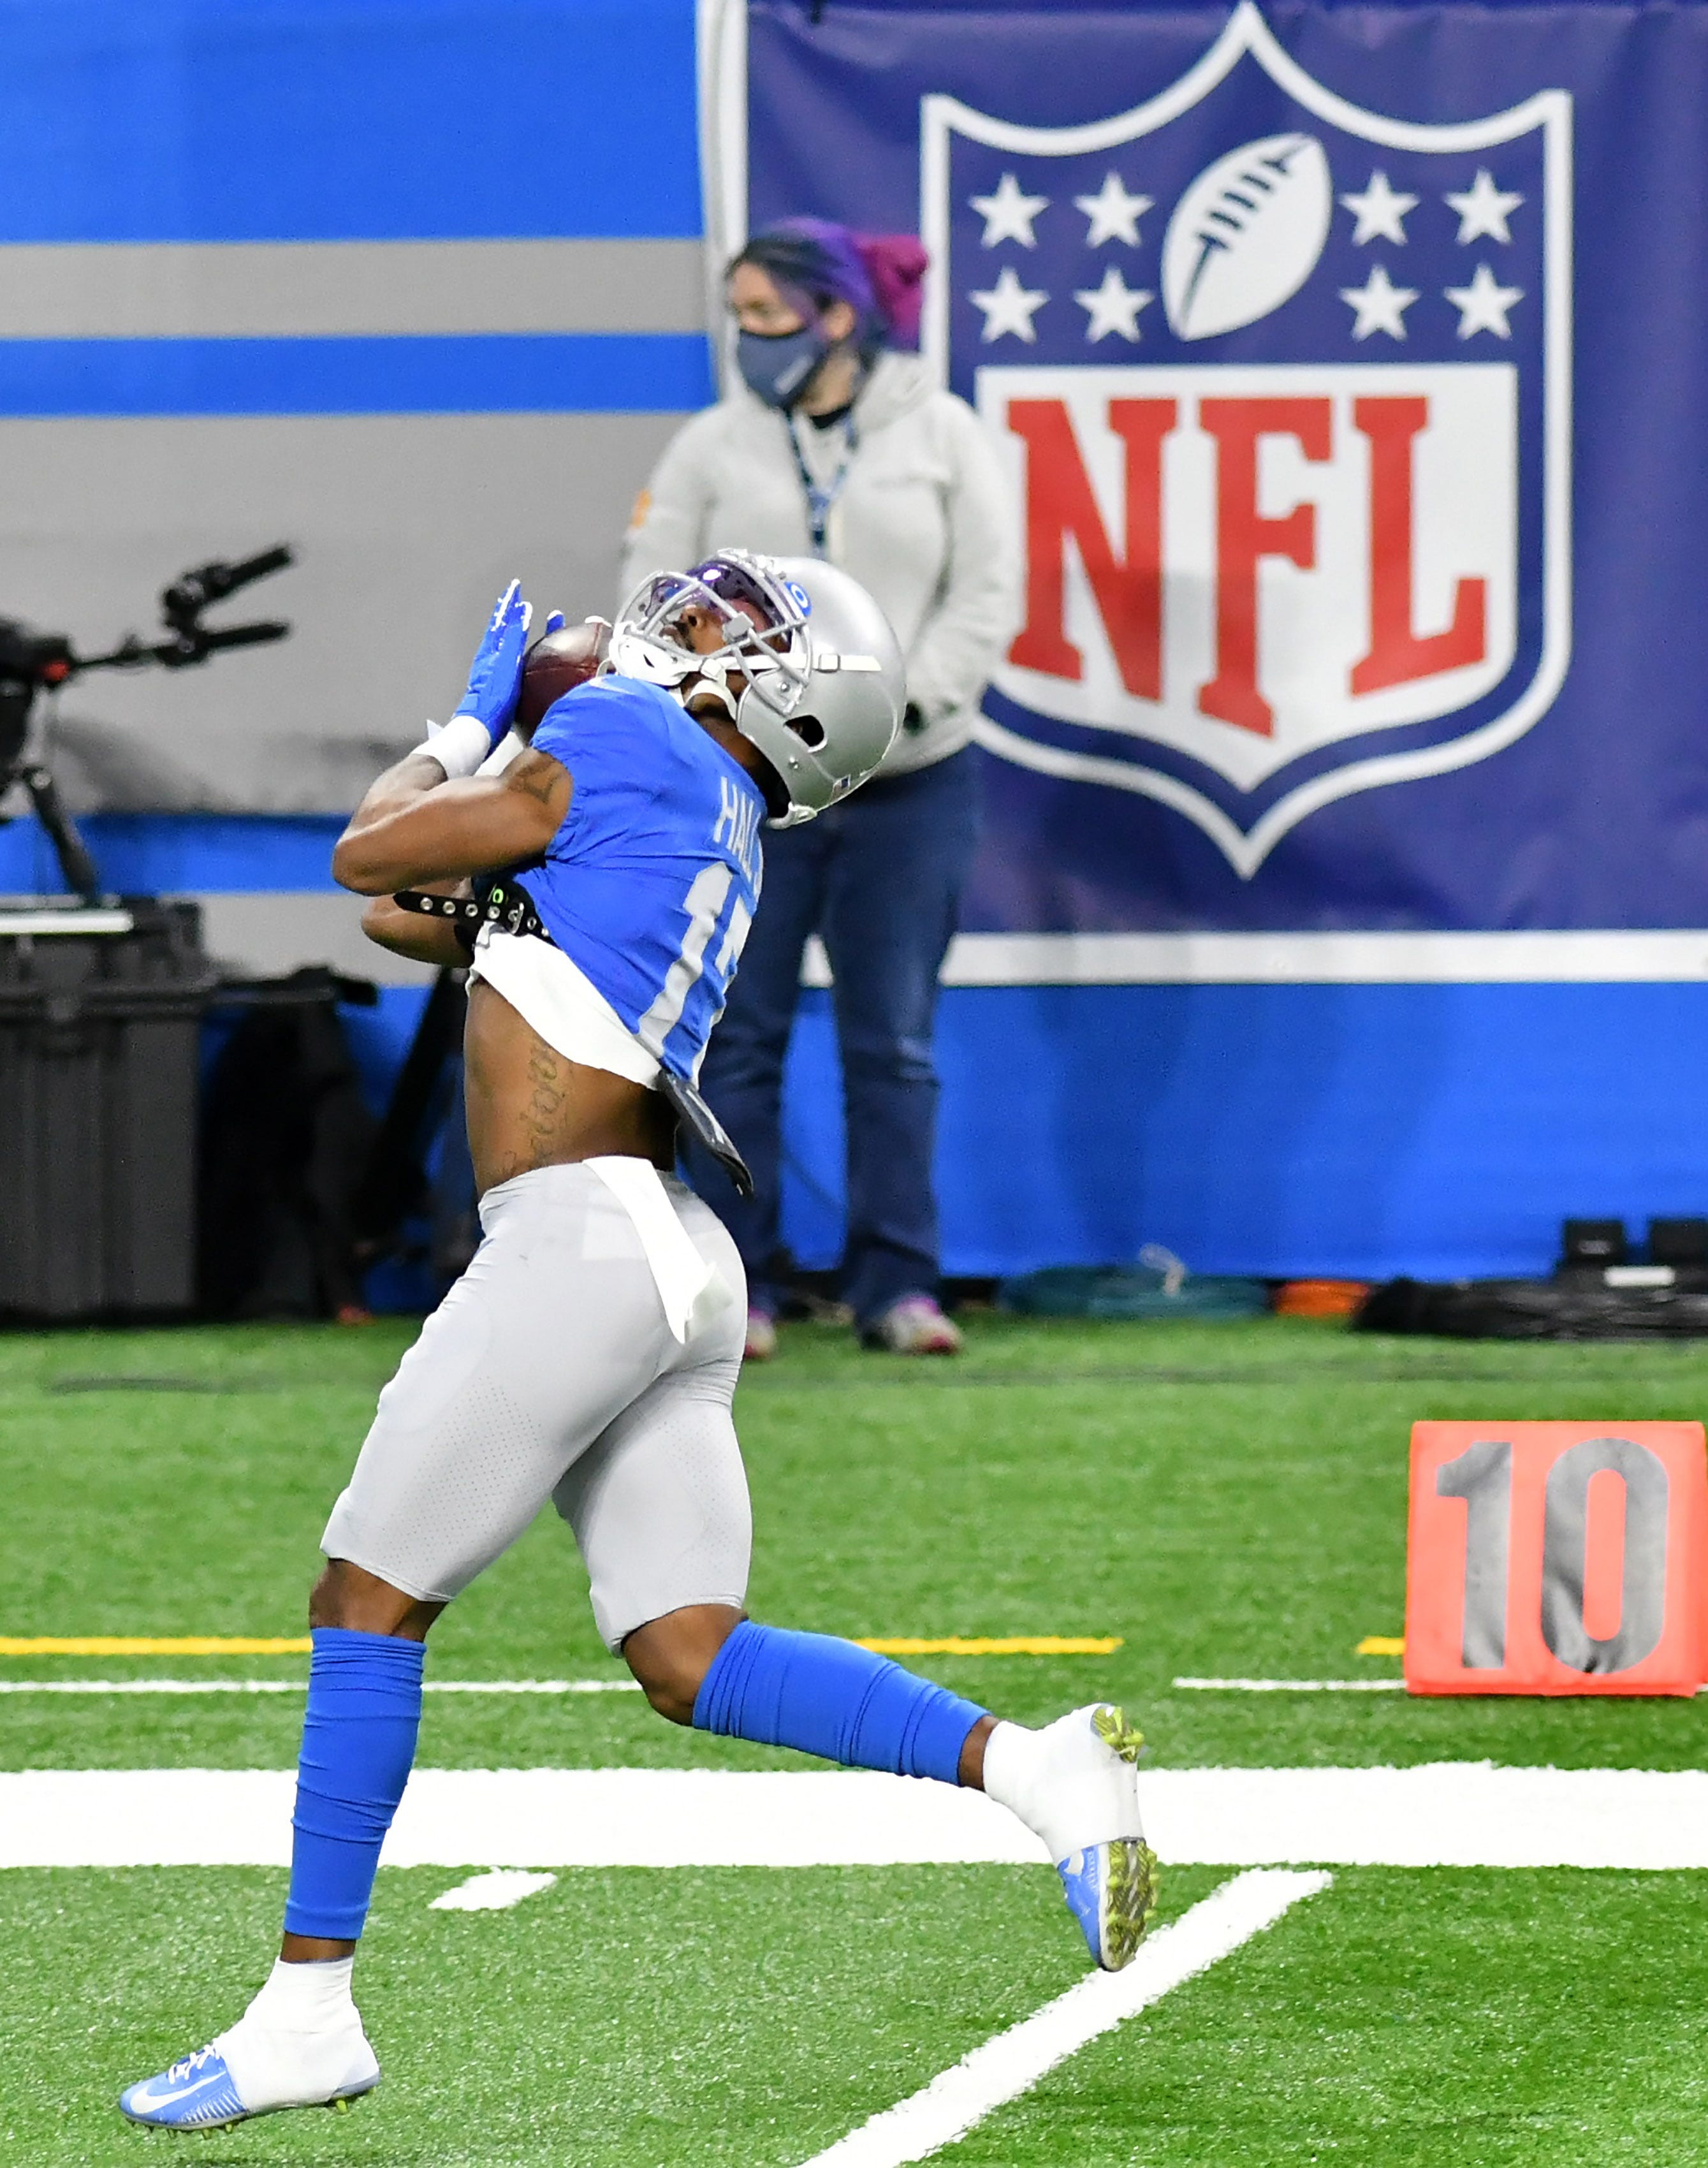 Lions wide receiver Marvin Hall (17) makes a catch during warmups.